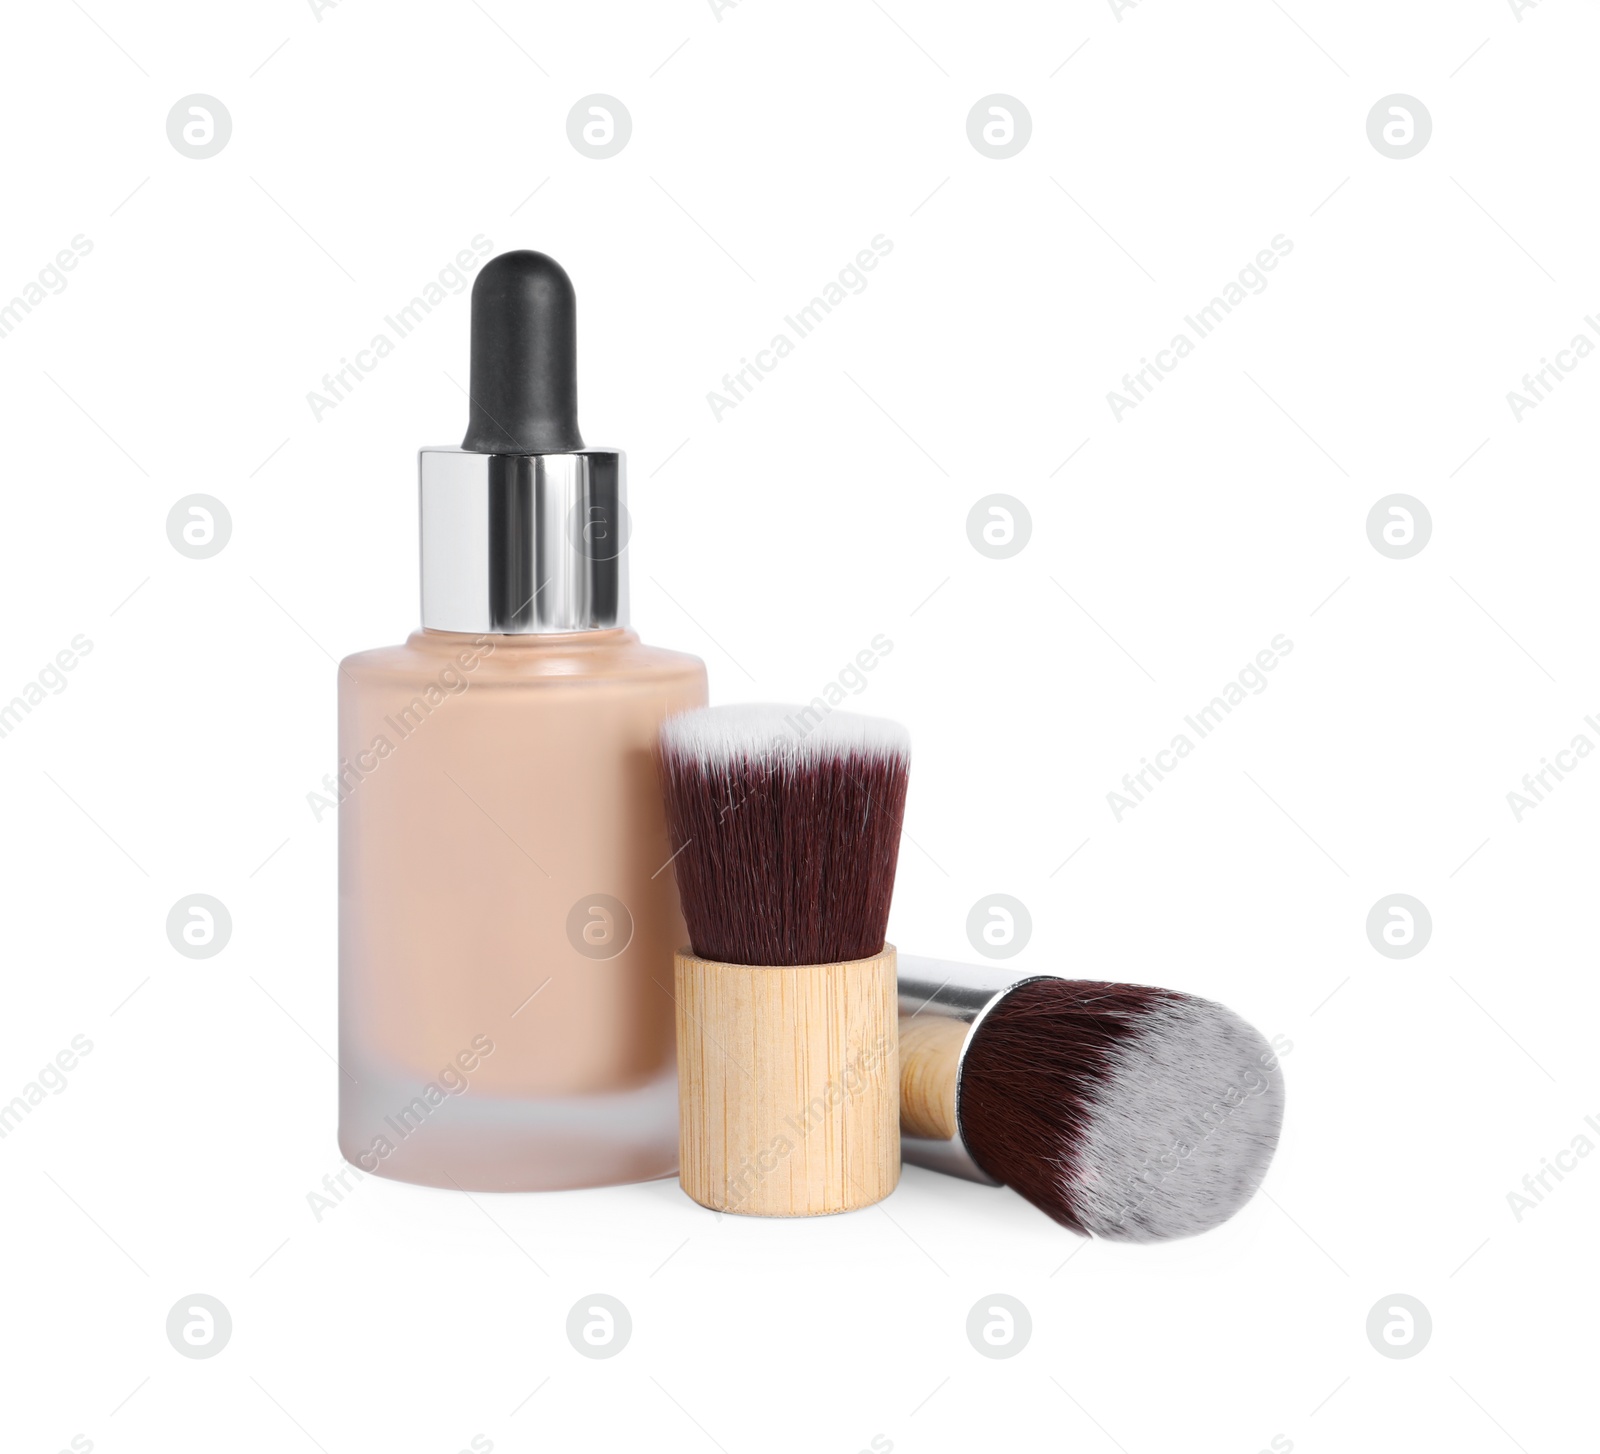 Photo of Bottle of skin foundation and brushes on white background. Makeup product